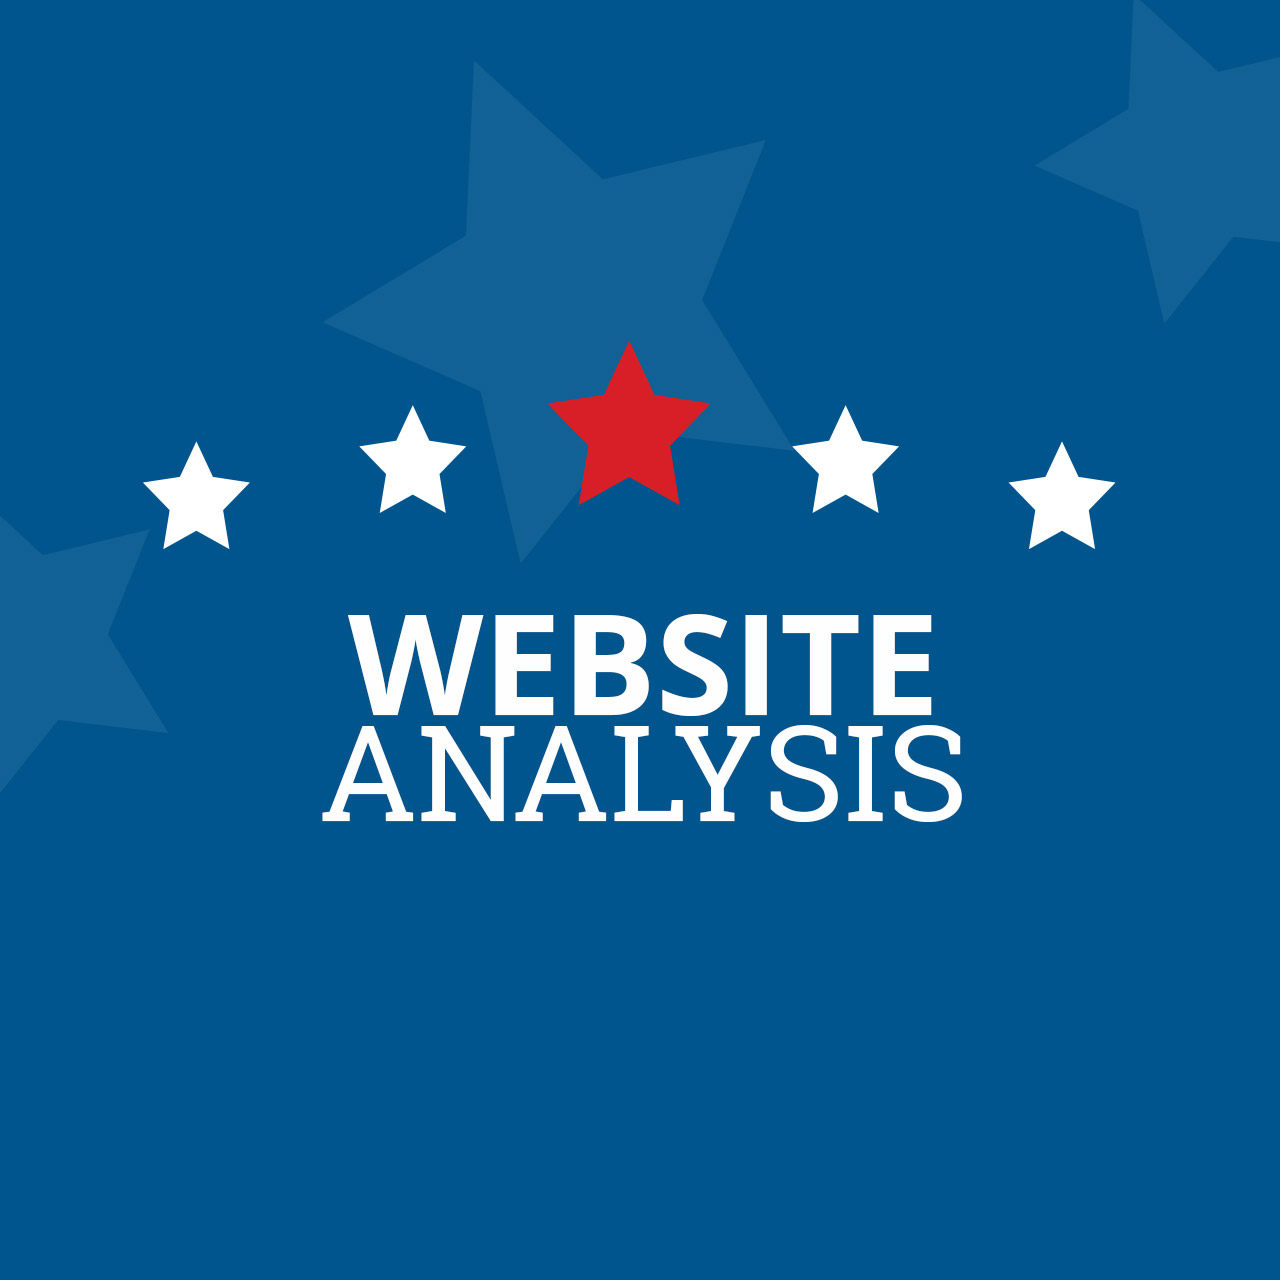 Featured image for “Website Analysis”